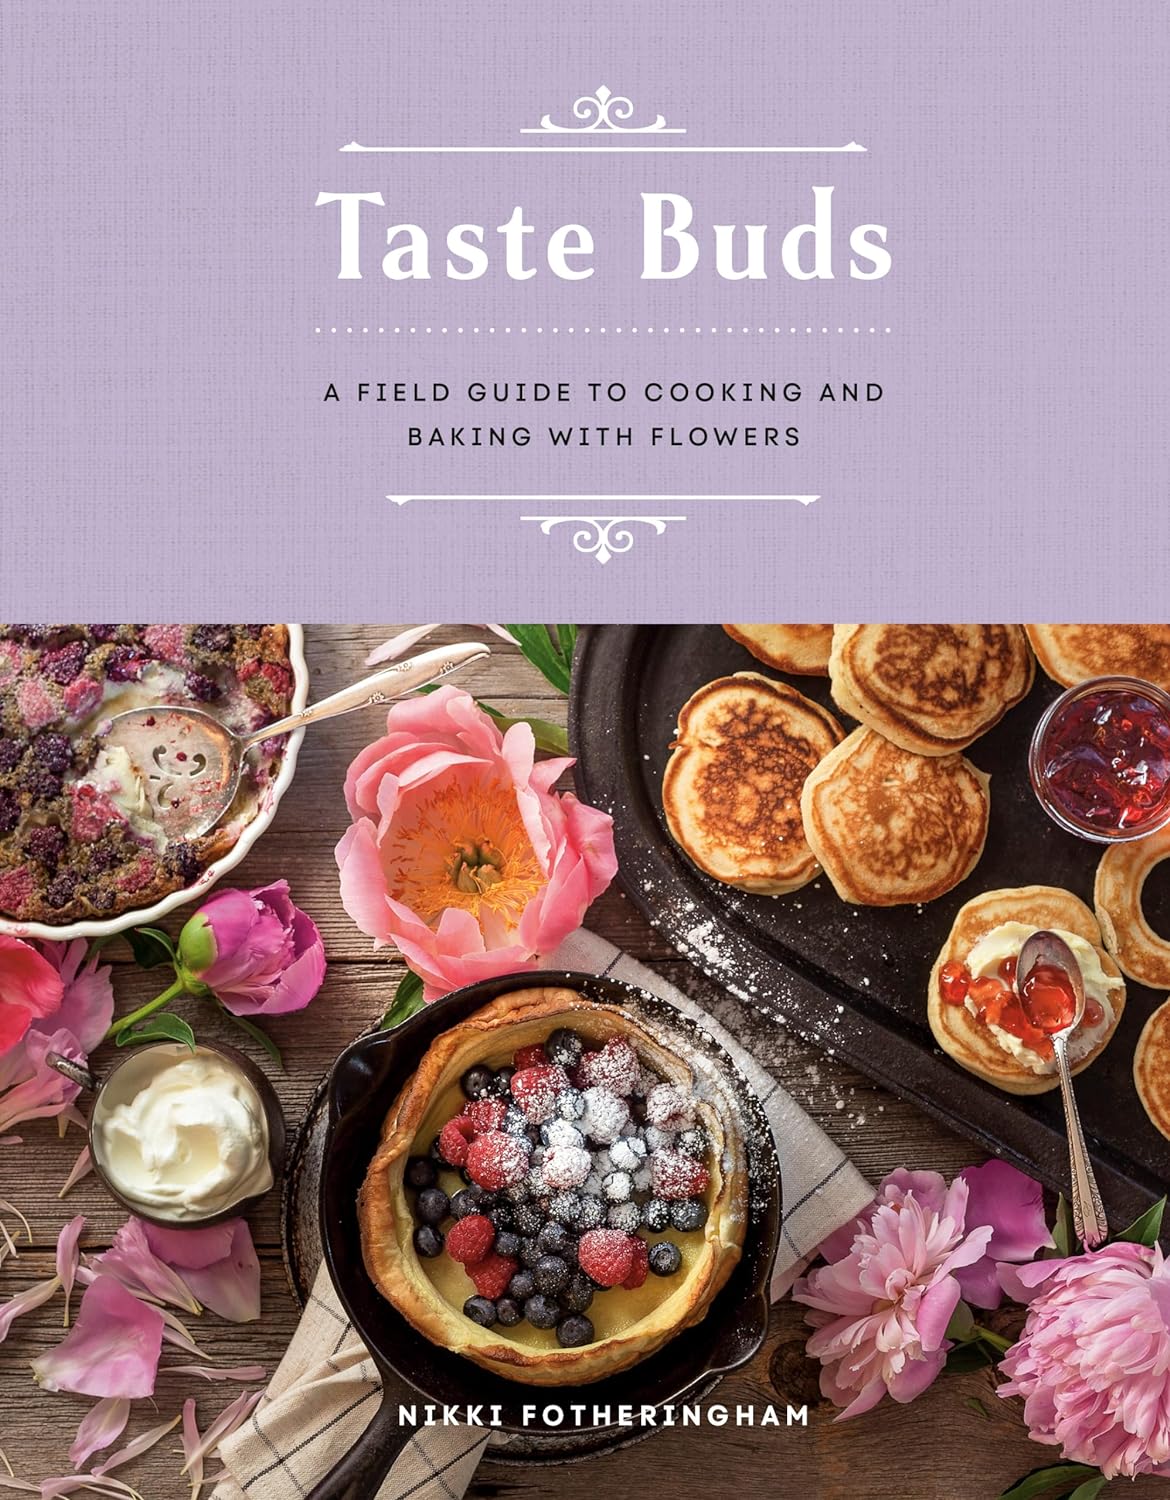 Taste Buds: A Field Guide to Cooking and Baking with Flowers (Nikki Fotheringham)